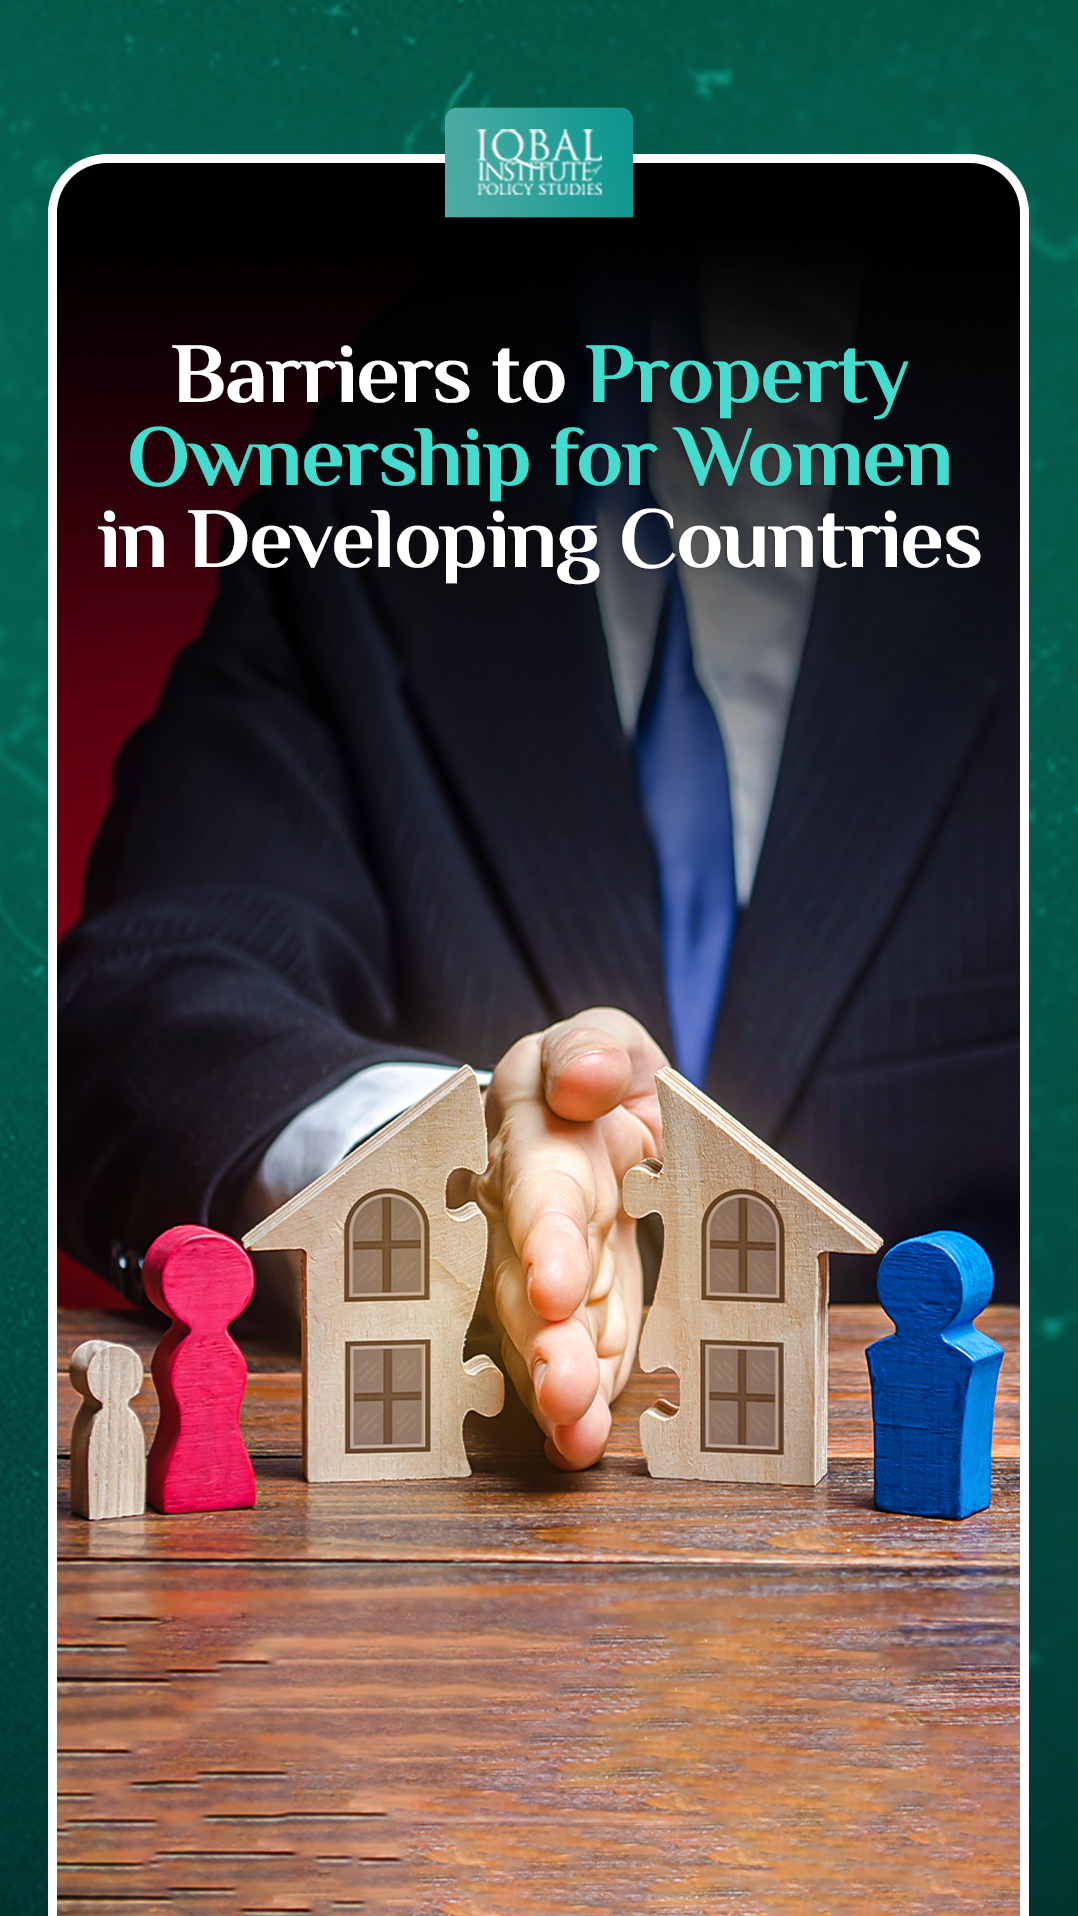 Barriers to Property Ownership for Women in Developing Countries